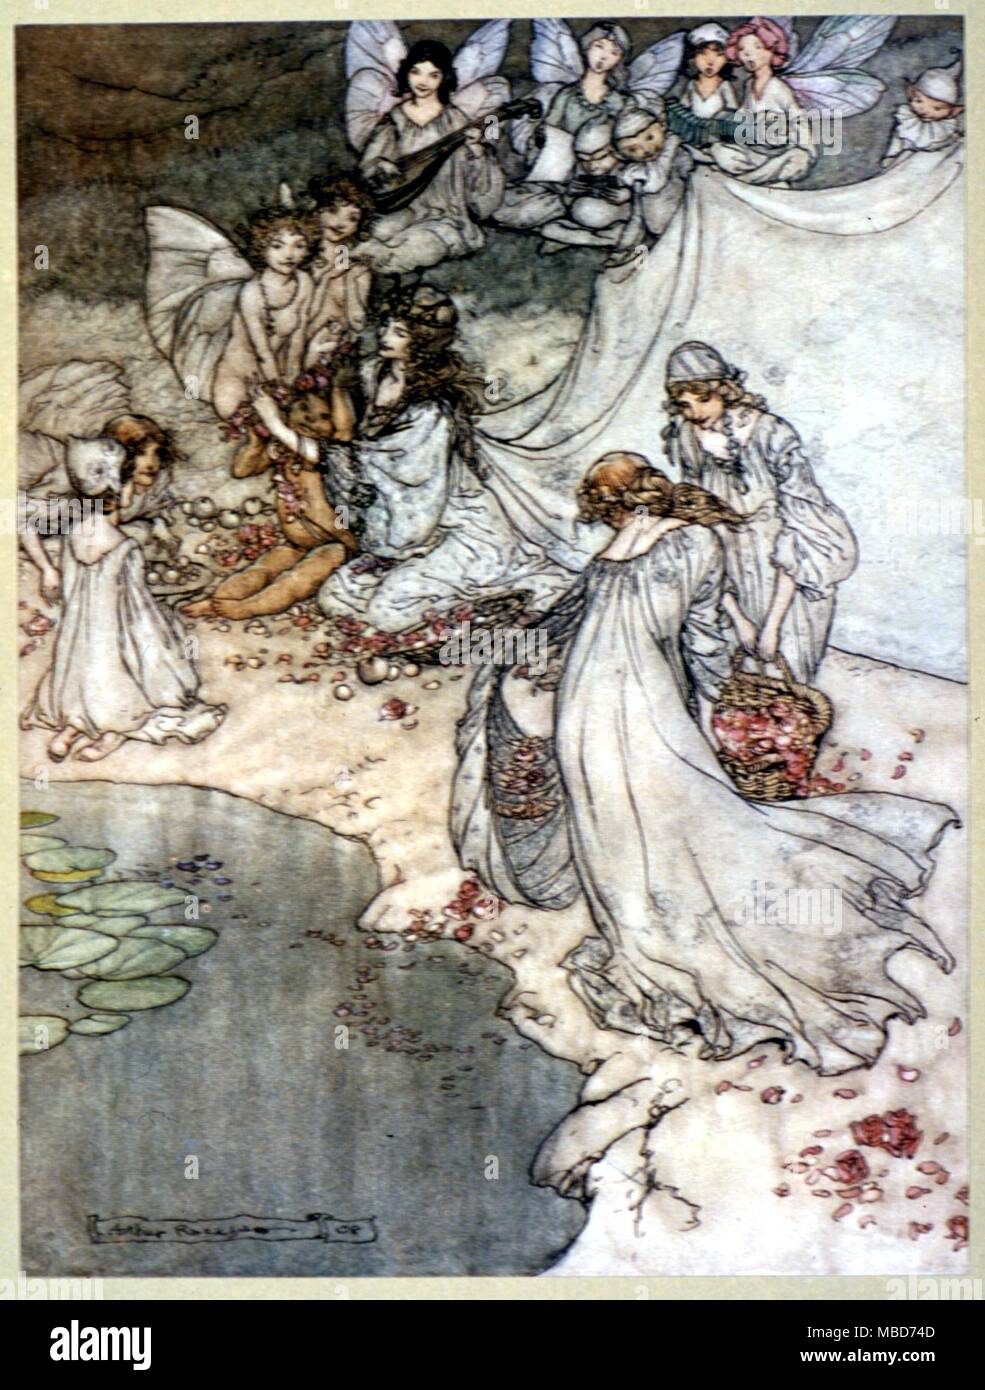 Fairy Tales - Midsummer Night's Dream - She never had so sweet a changeling. Illustration by Arthur Rackham for the 1908 edition of A Midsummer Night's Dream, by Shakespeare Stock Photo